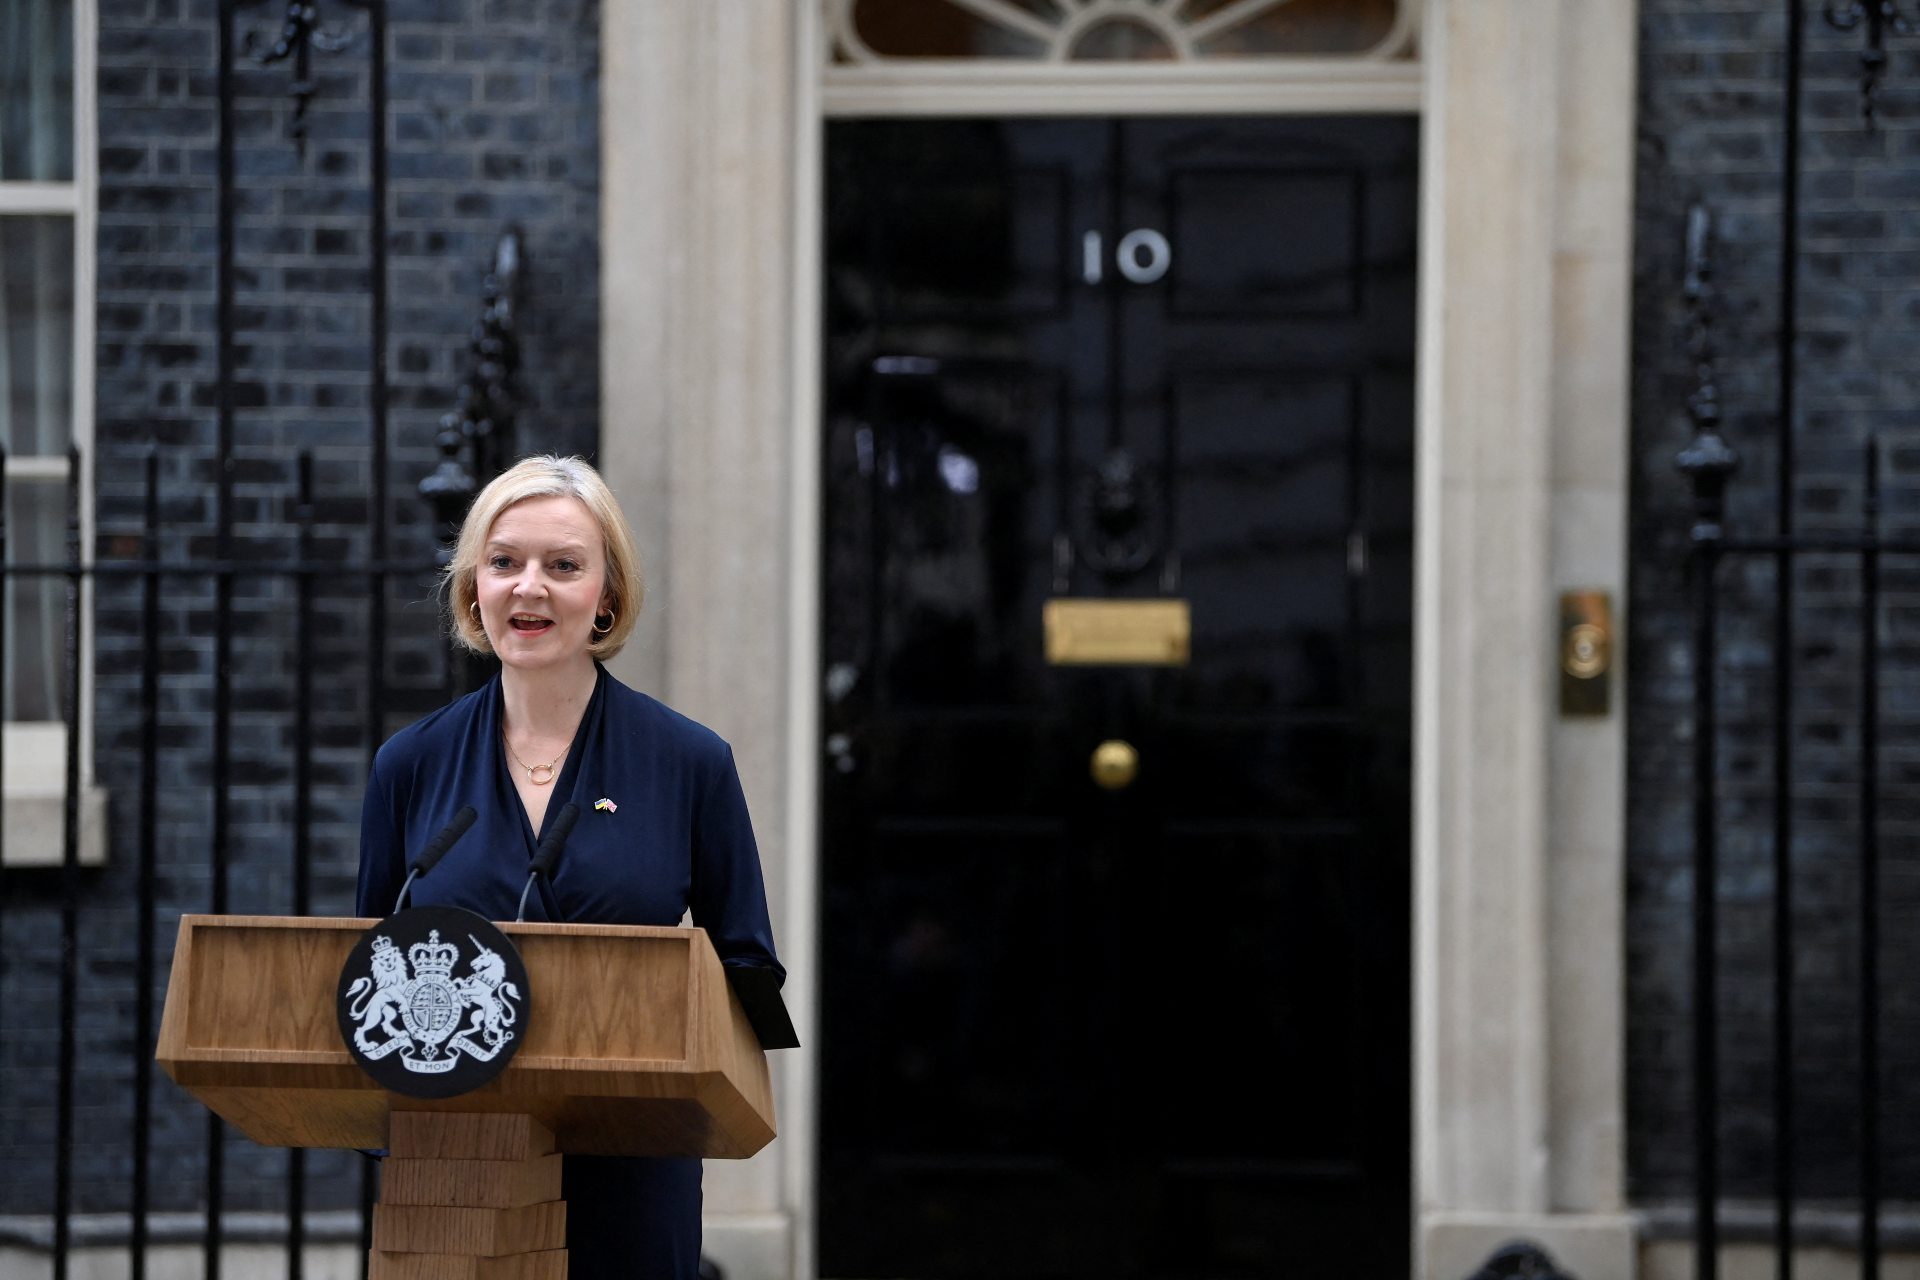 Liz Truss quits after 6 chaotic weeks as UK prime minister